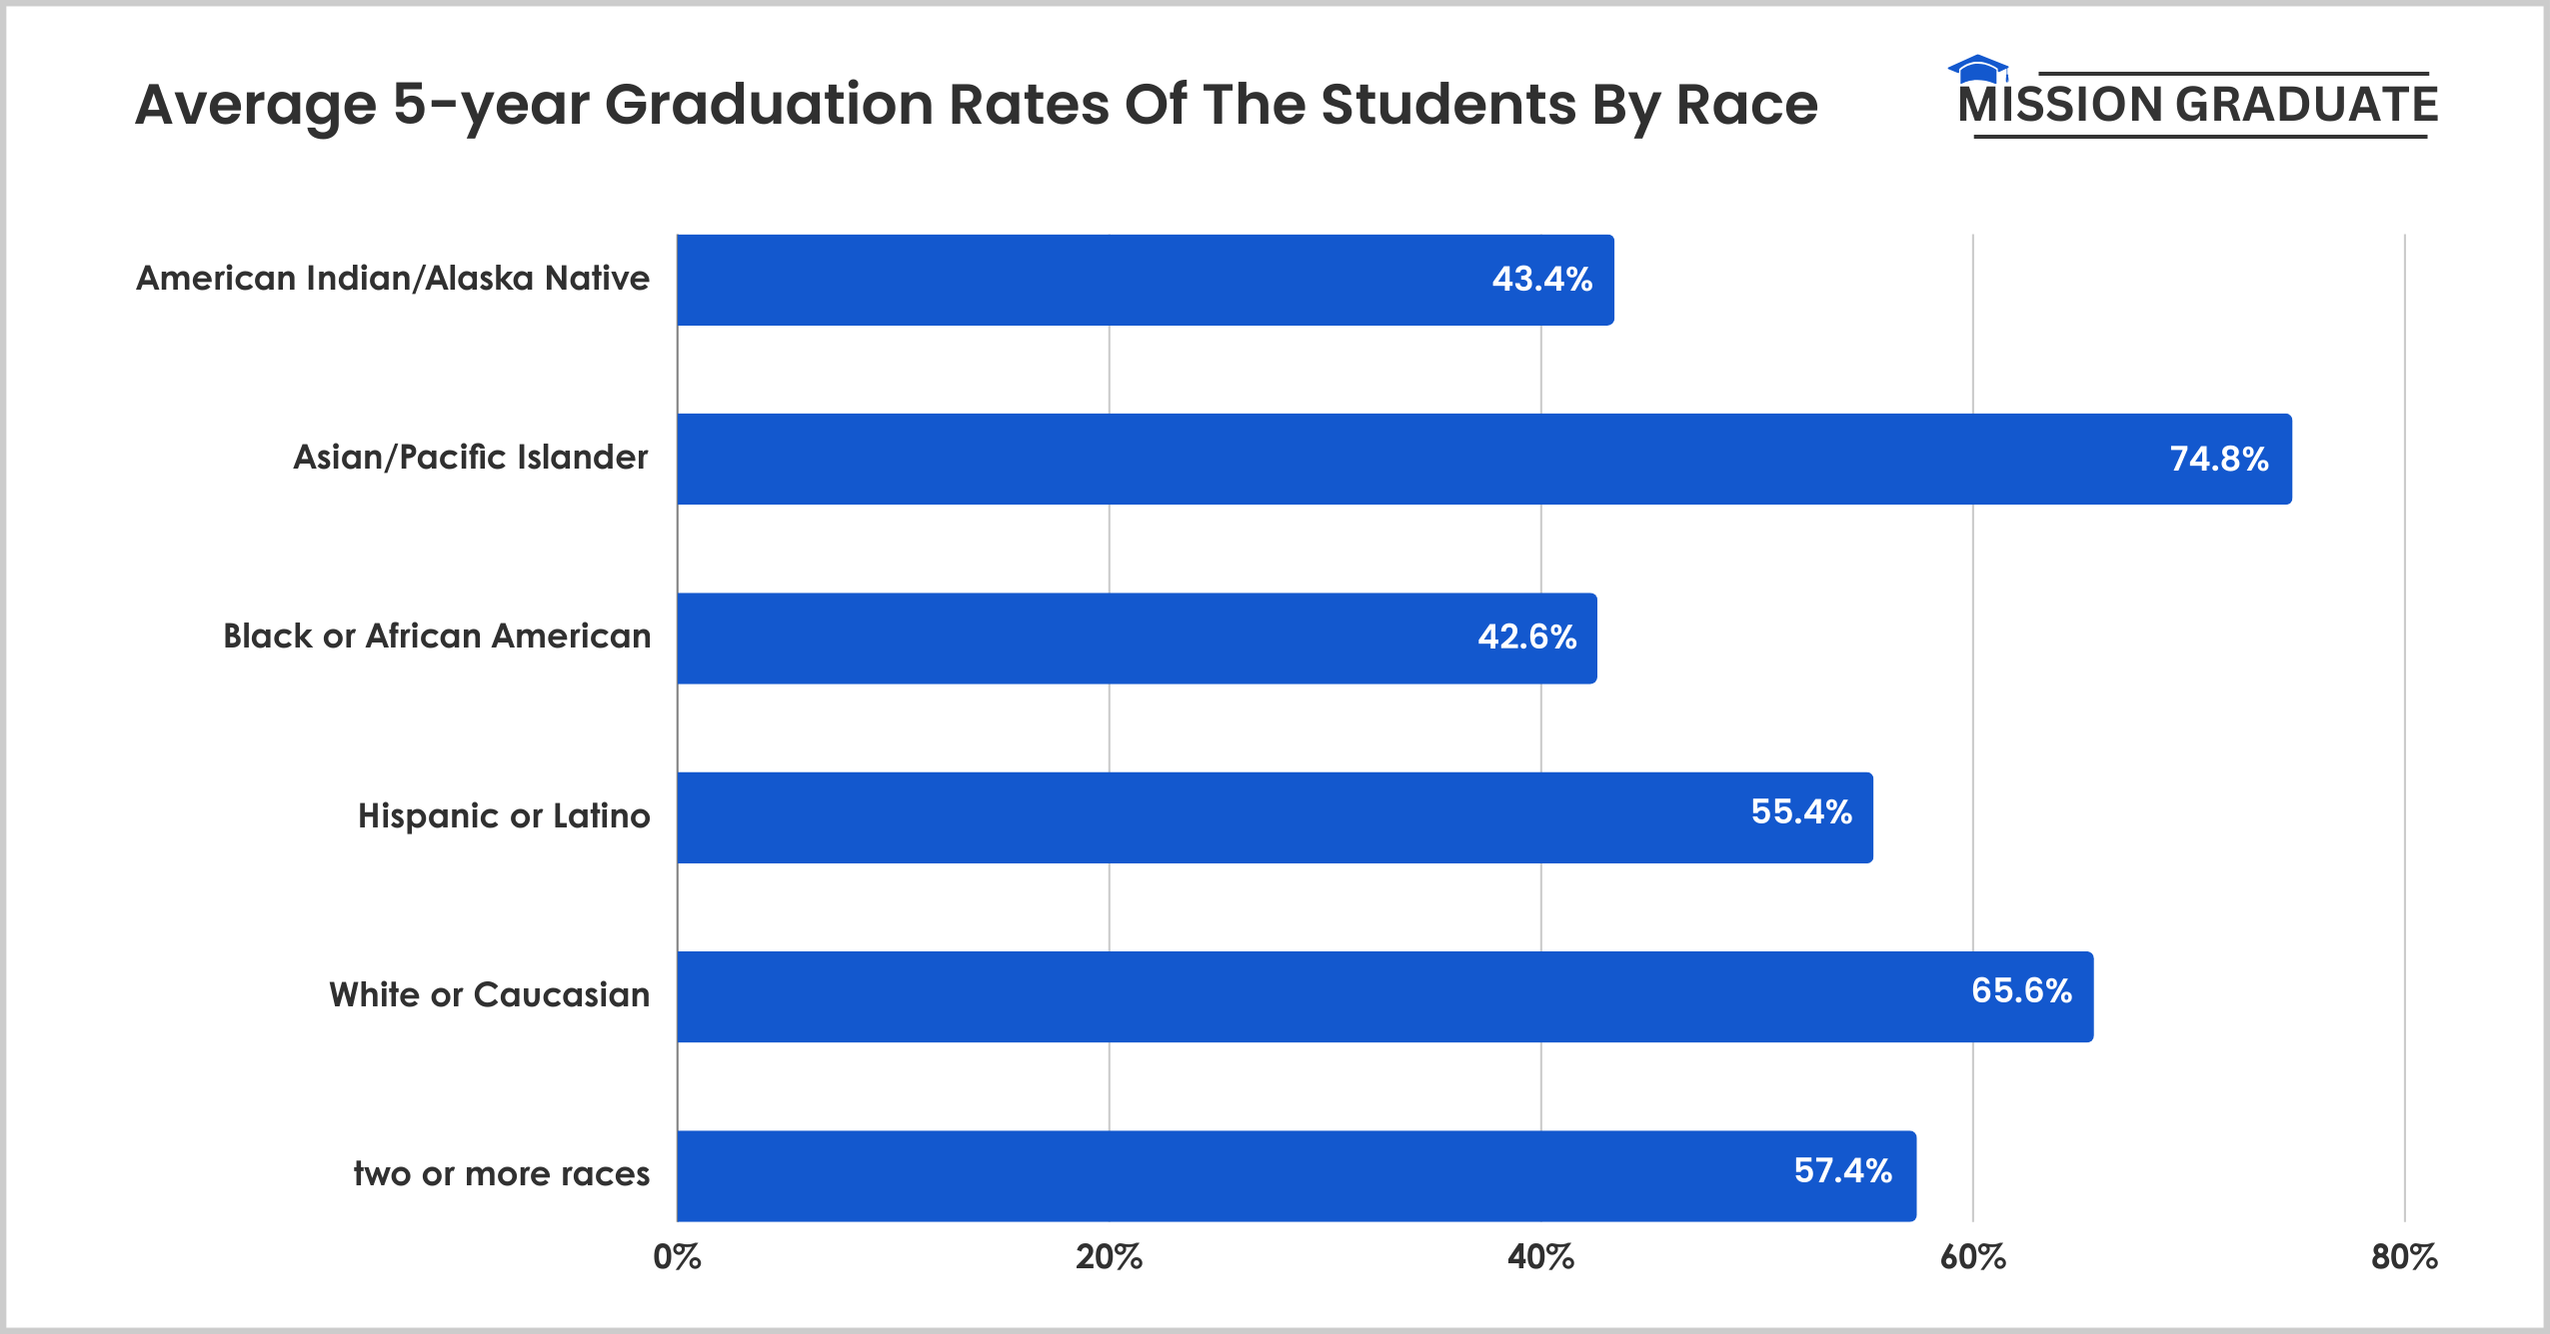 Average 5-year Graduation Rates Of The Students By Race